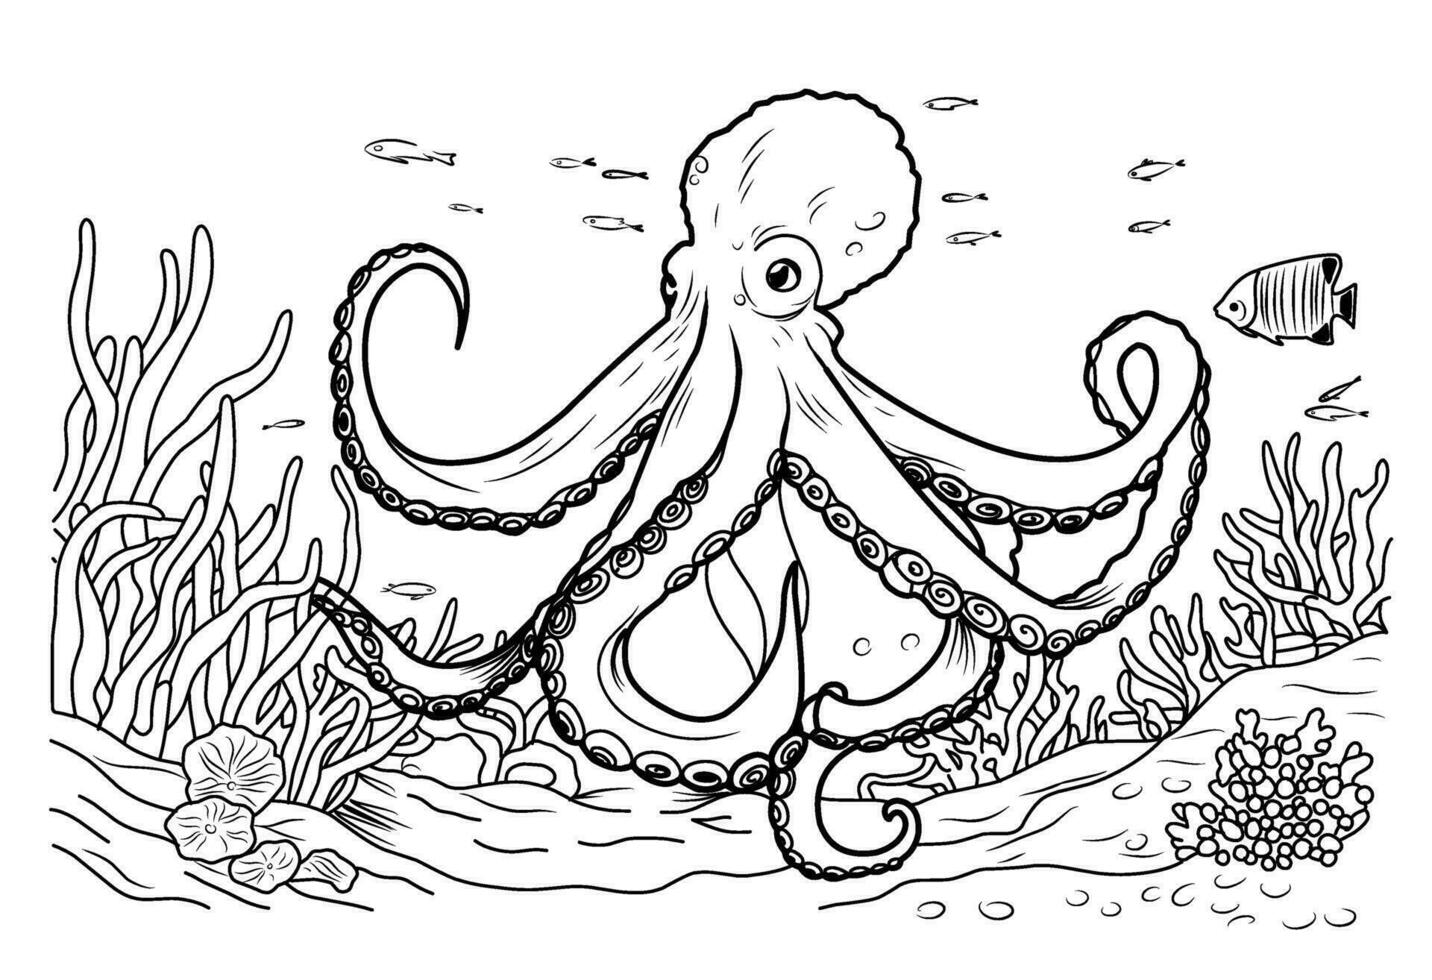 Octopus coloring book. Coloring page simple line illustration of octopus and underwater world. vector